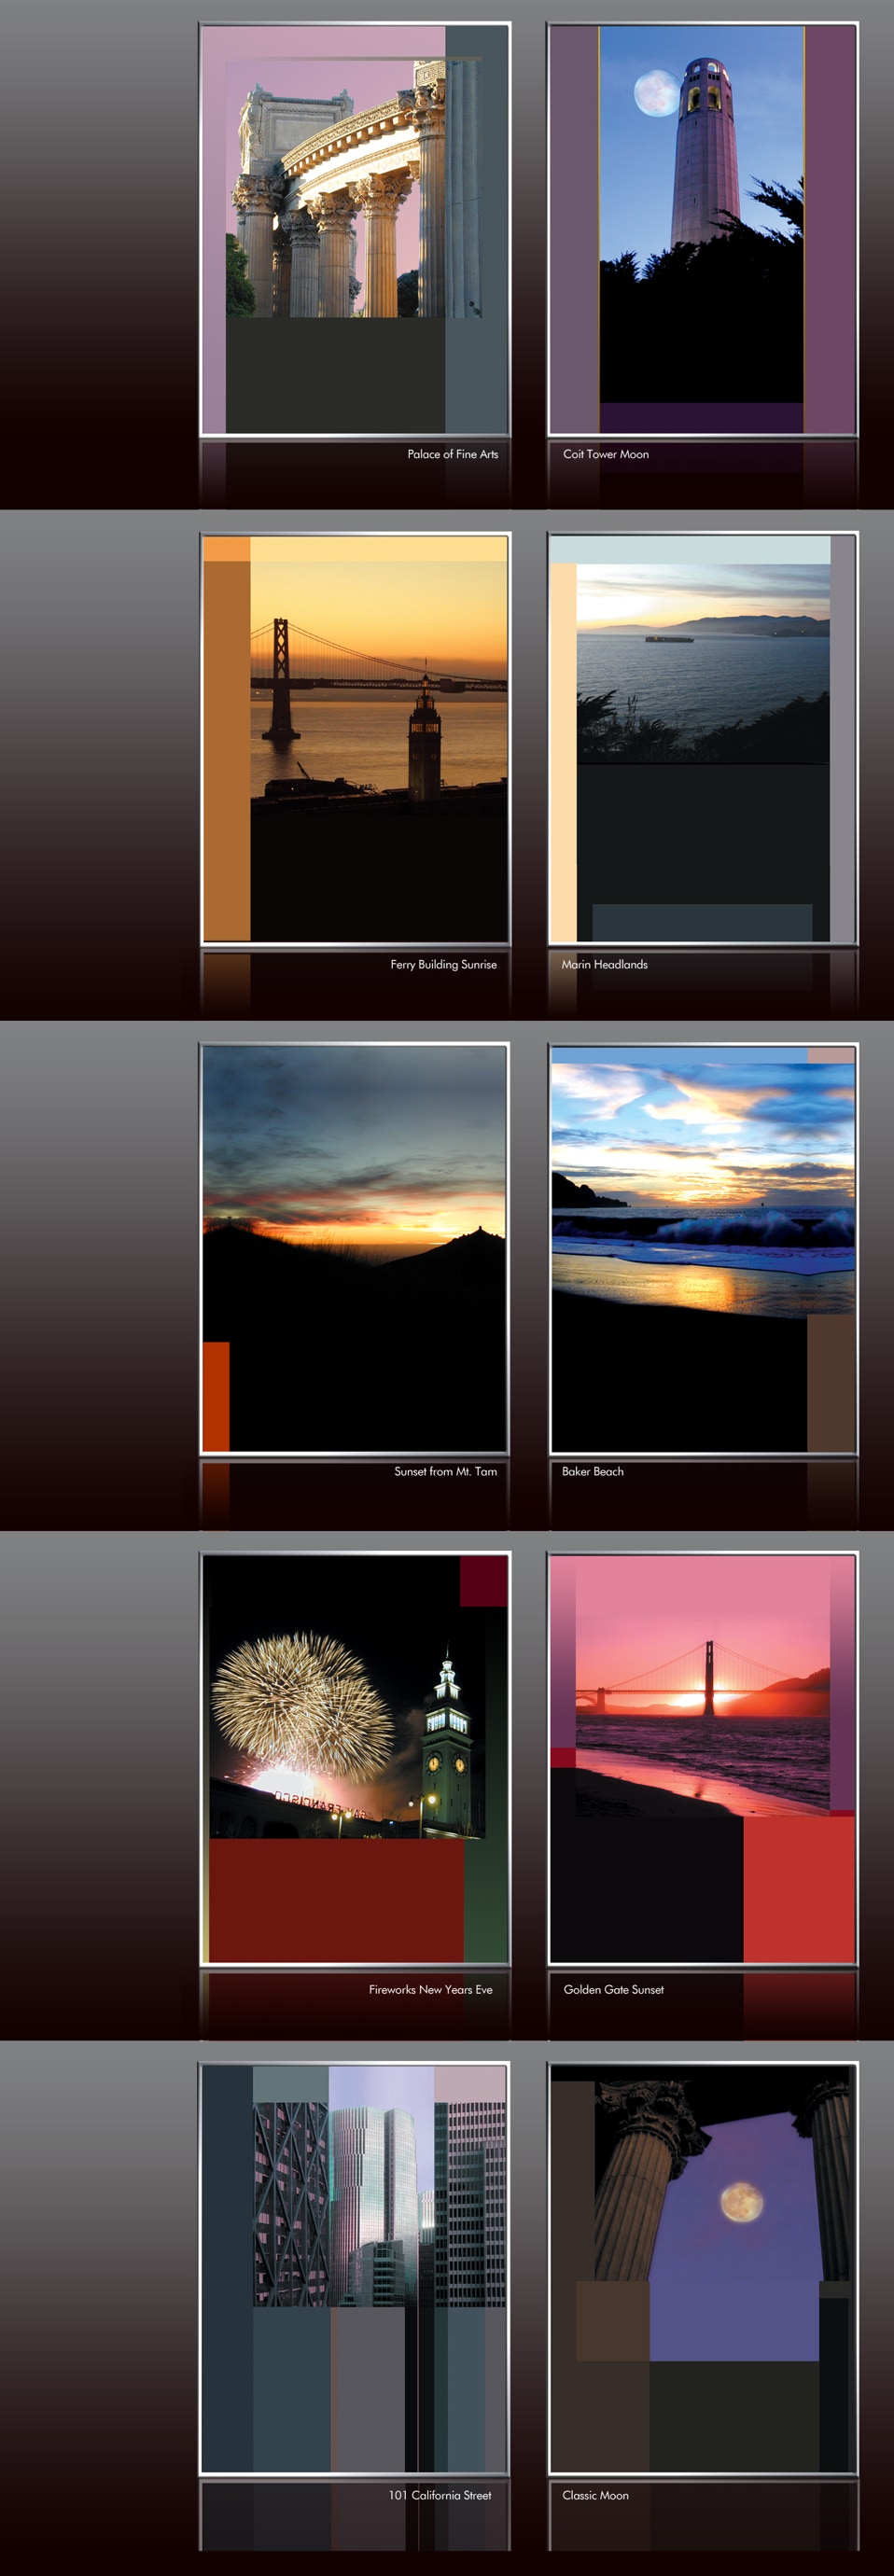 In the process of exploring the possibilities of digital photography, our creative staff developed a variation of the color-study based on photos of Northern California views.